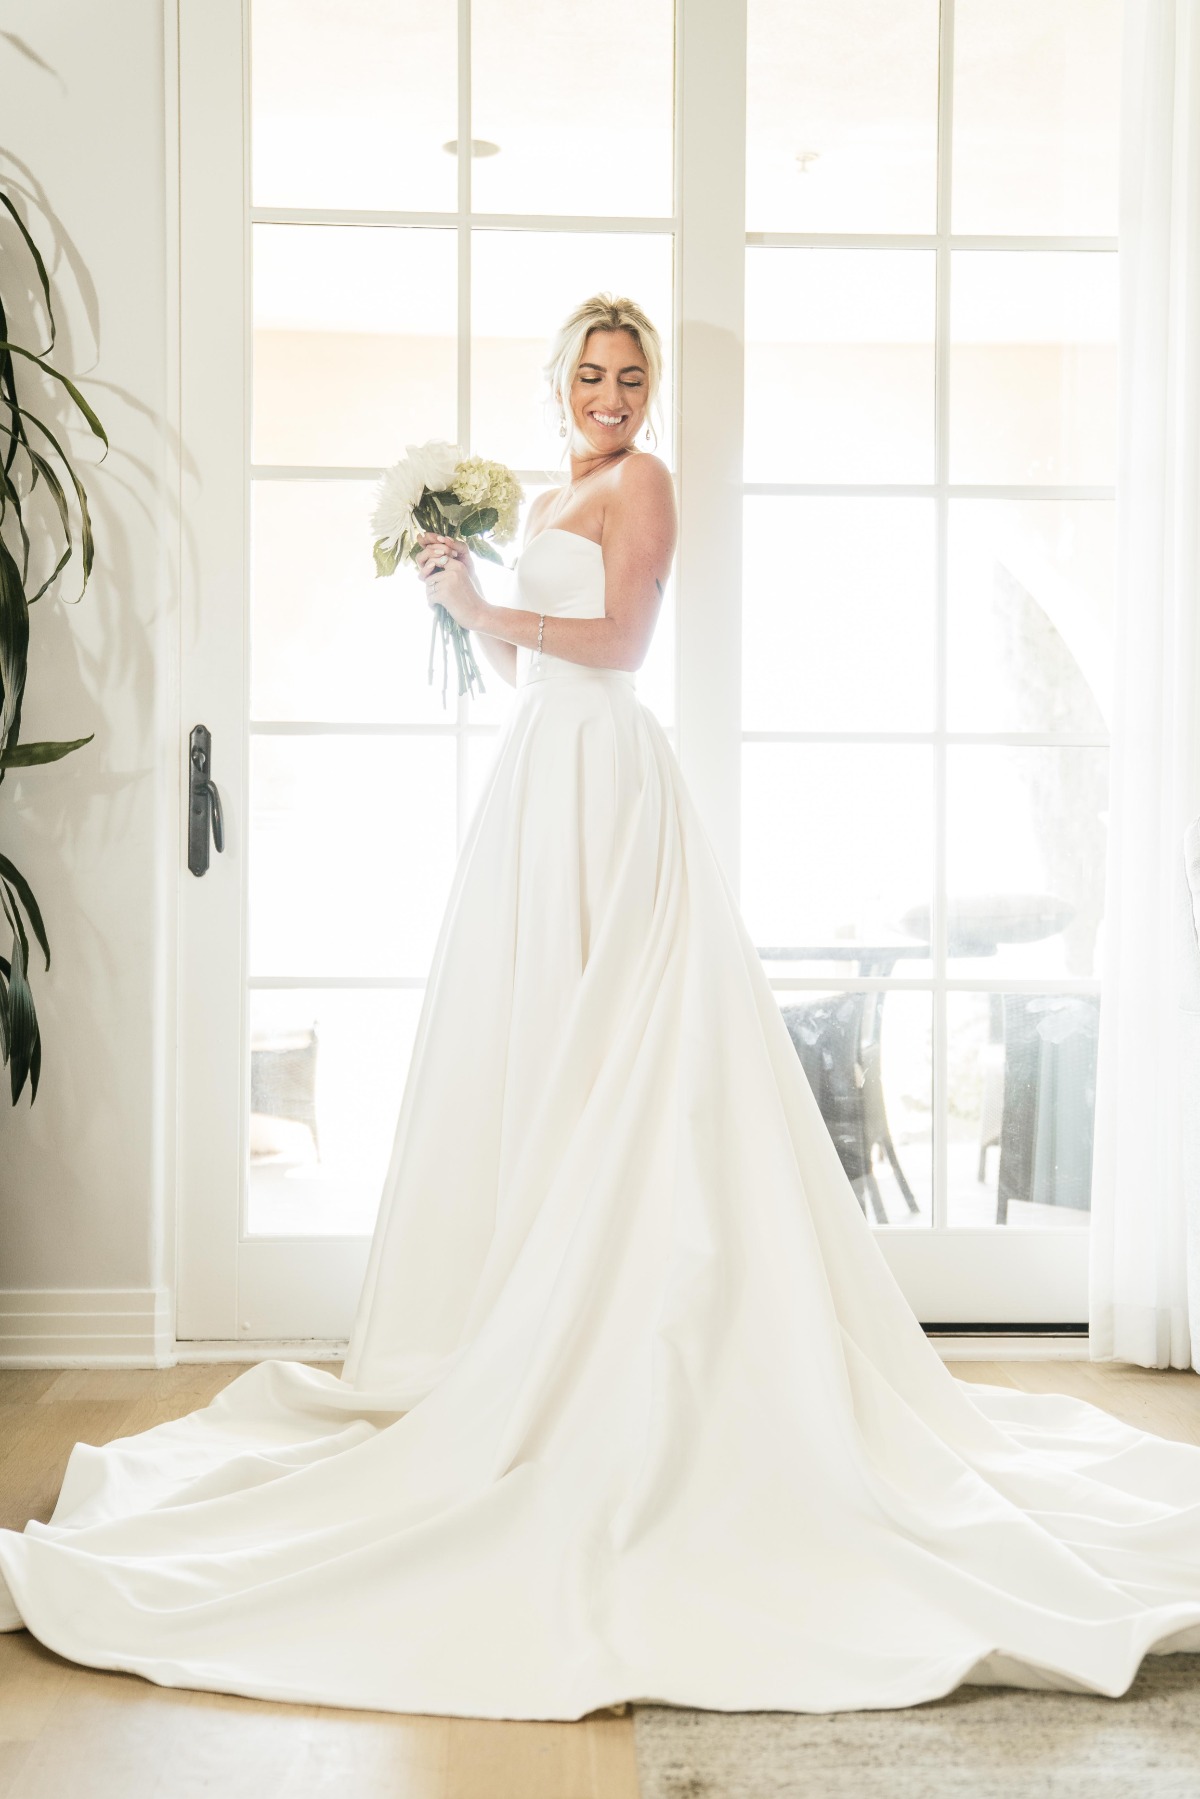 Bridal portrait holding bouquet in front of window